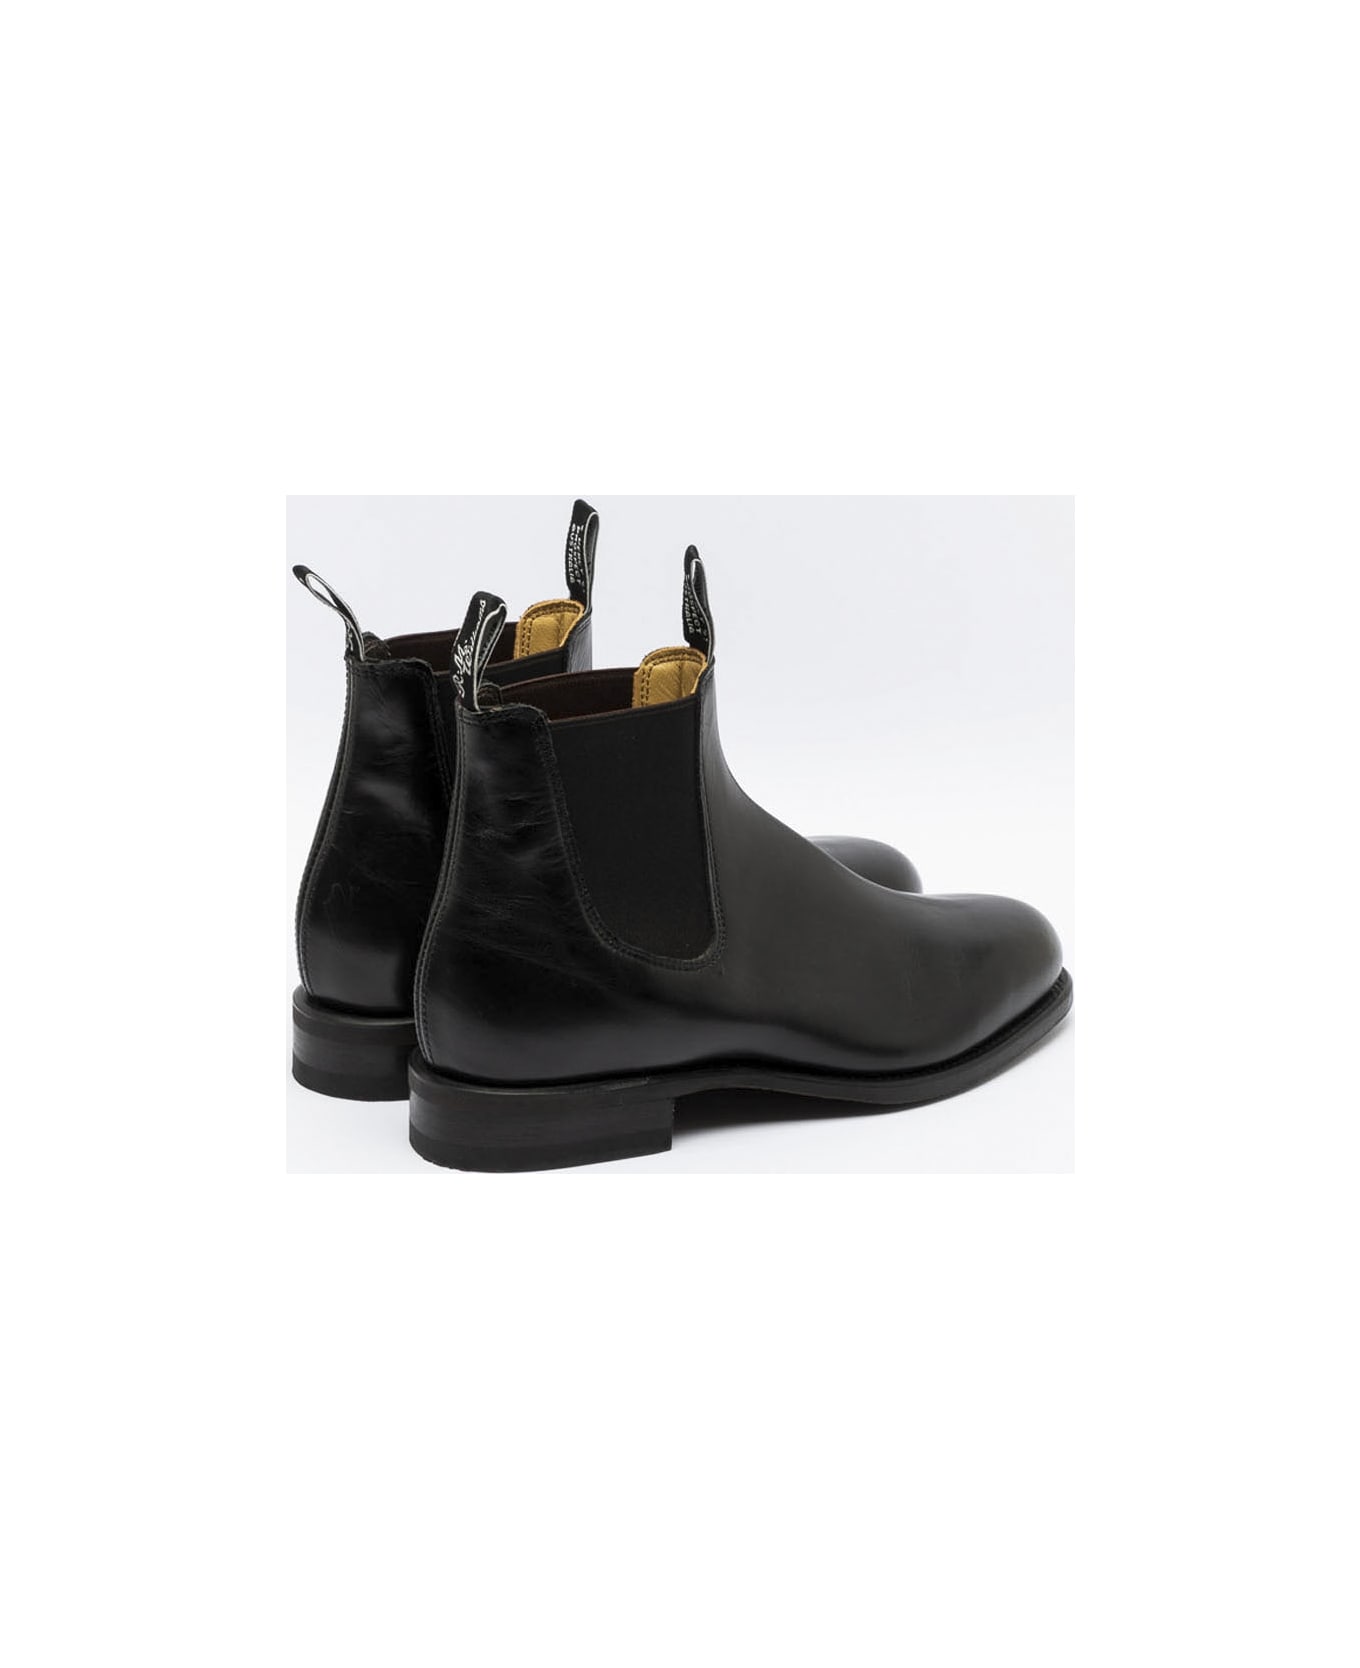 R.M.Williams Comfort Turnout Black Yearling Leather Chelsea Boot - Nero